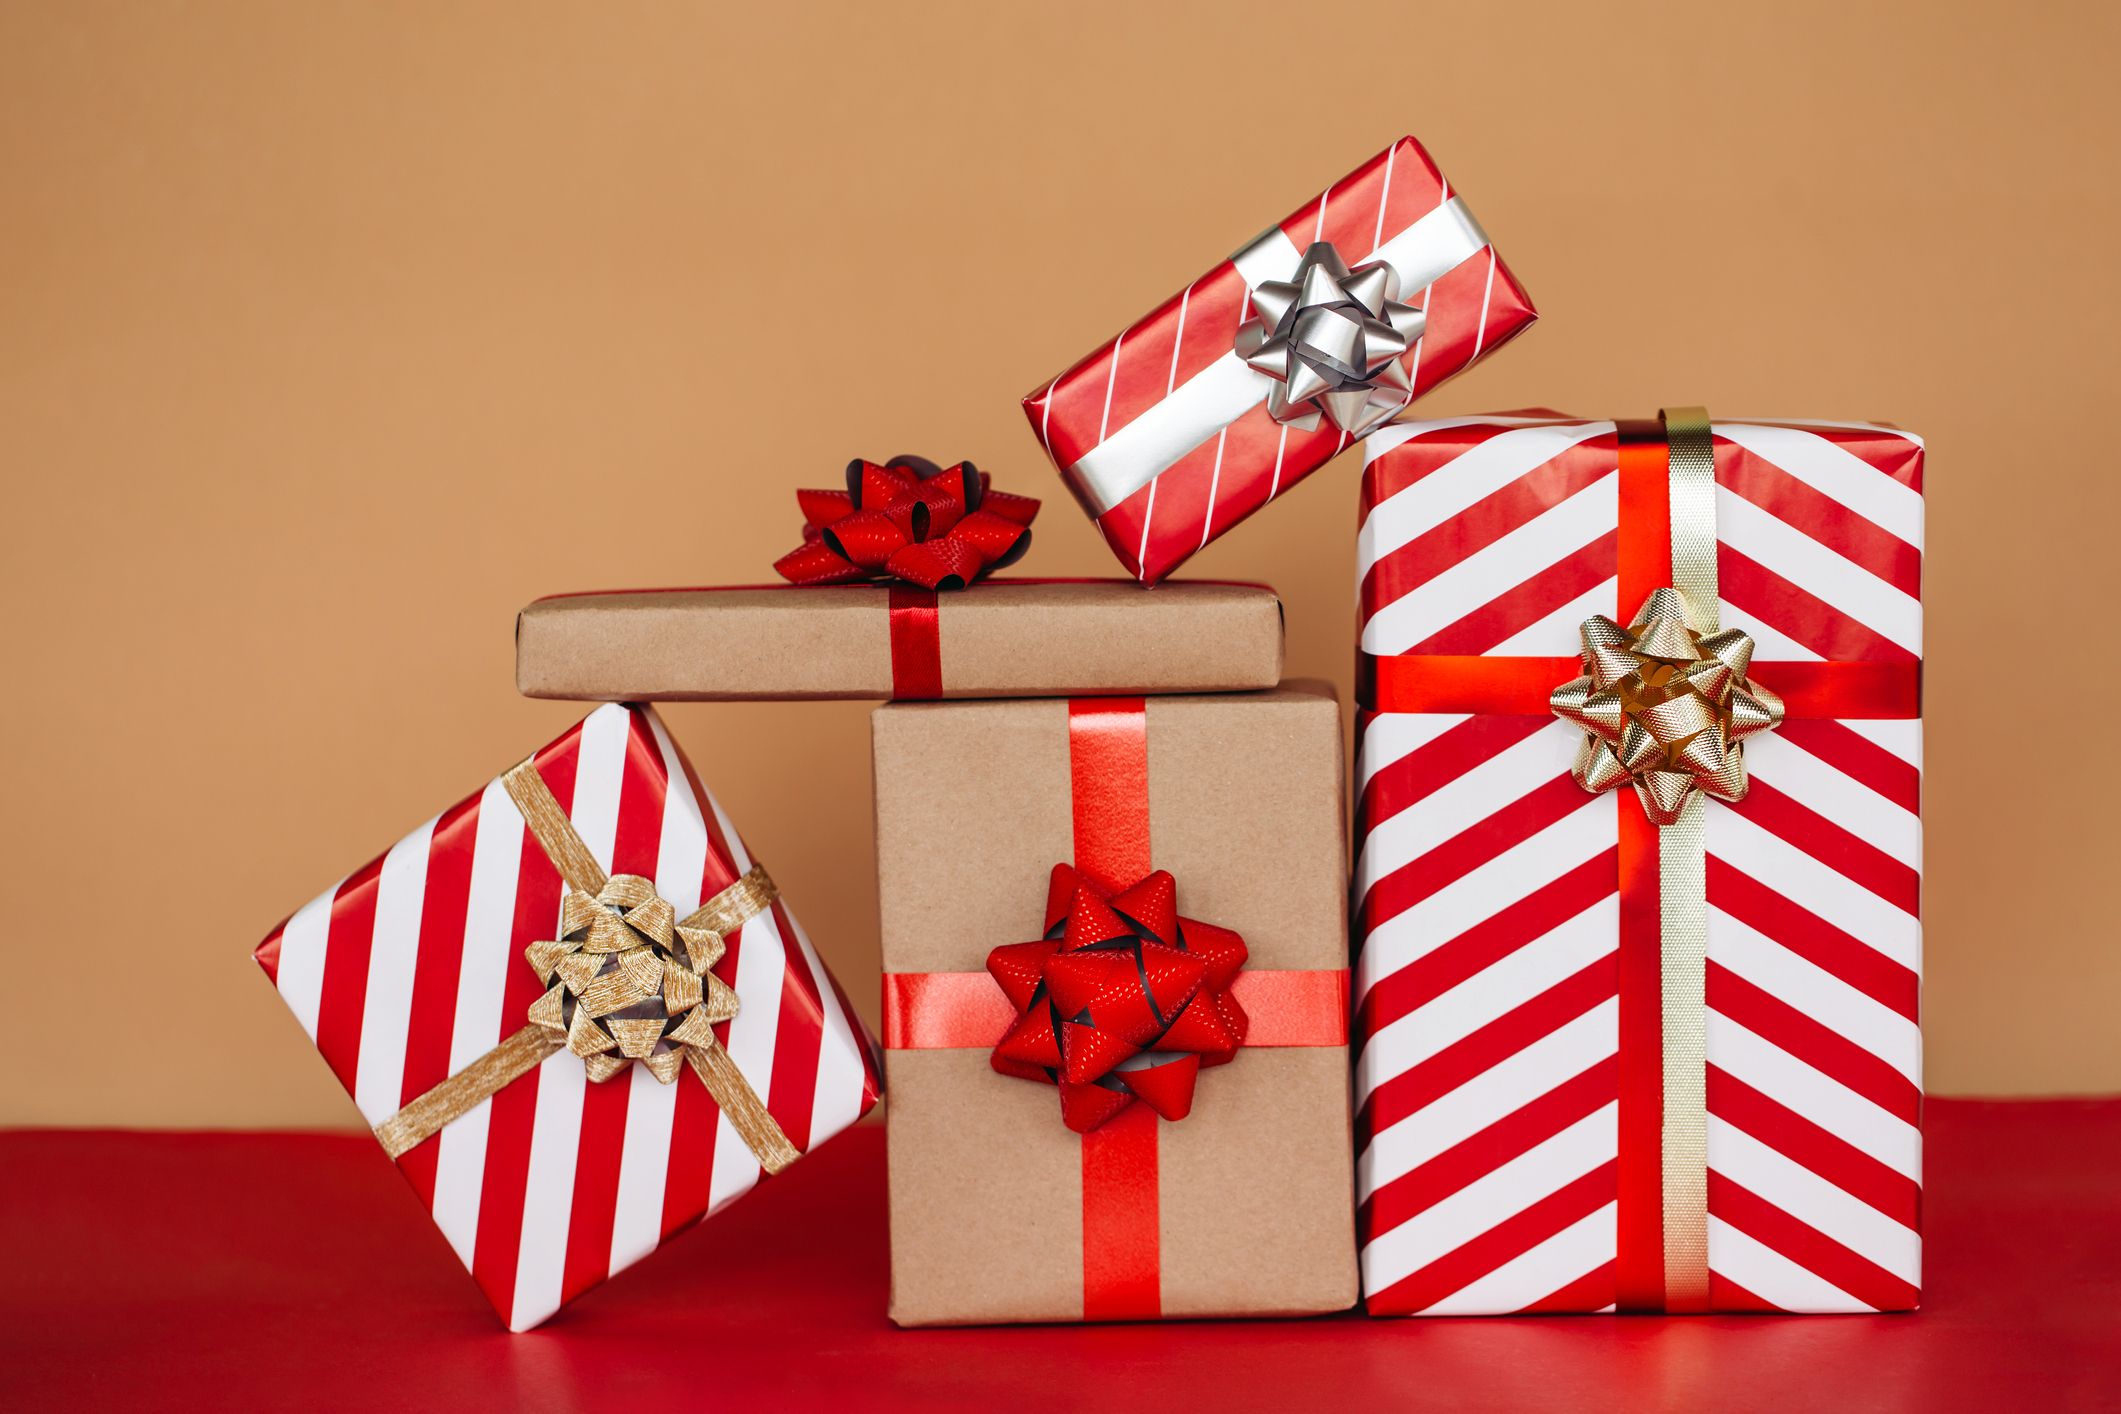 Can you recycle wrapping paper?